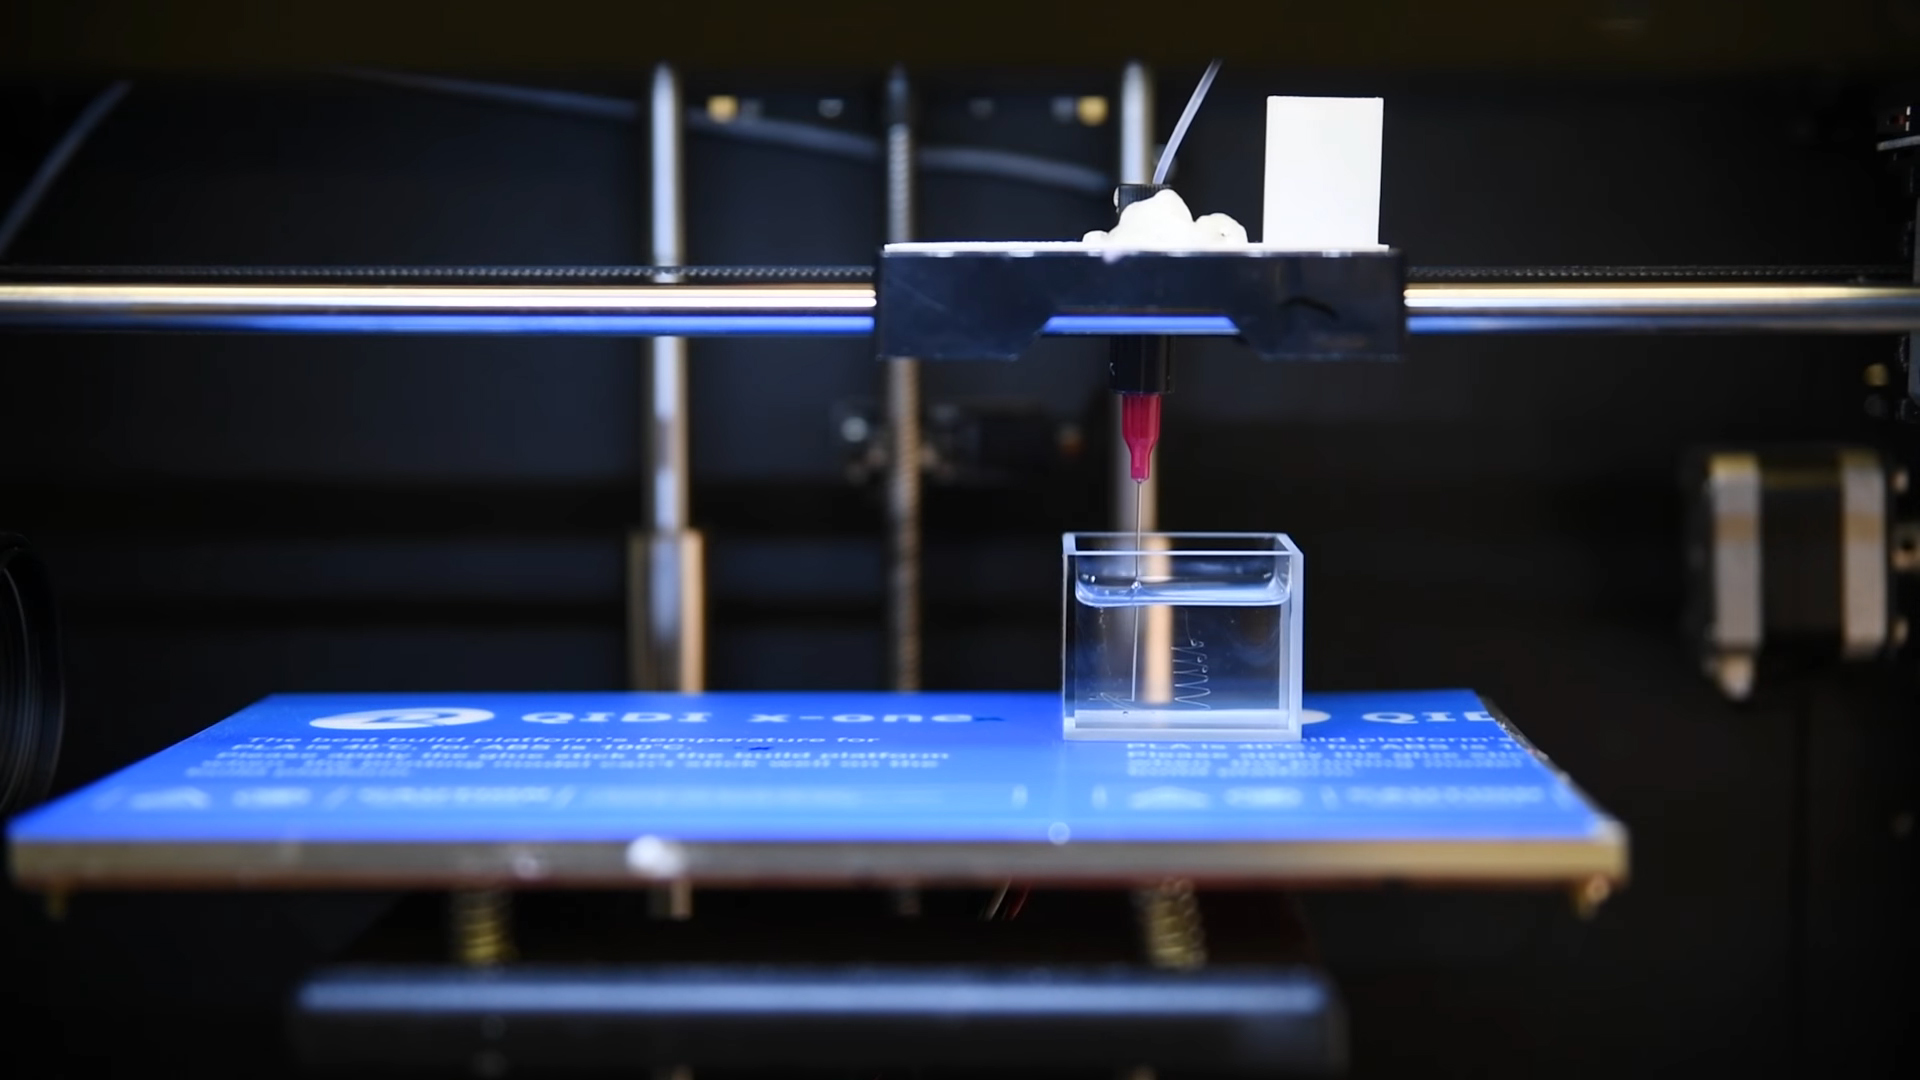 The modified Qidi X-One. A syringe and needle extrudes threads of water into a container of silicone oil. Photo via Berkeley Labs' YouTube.